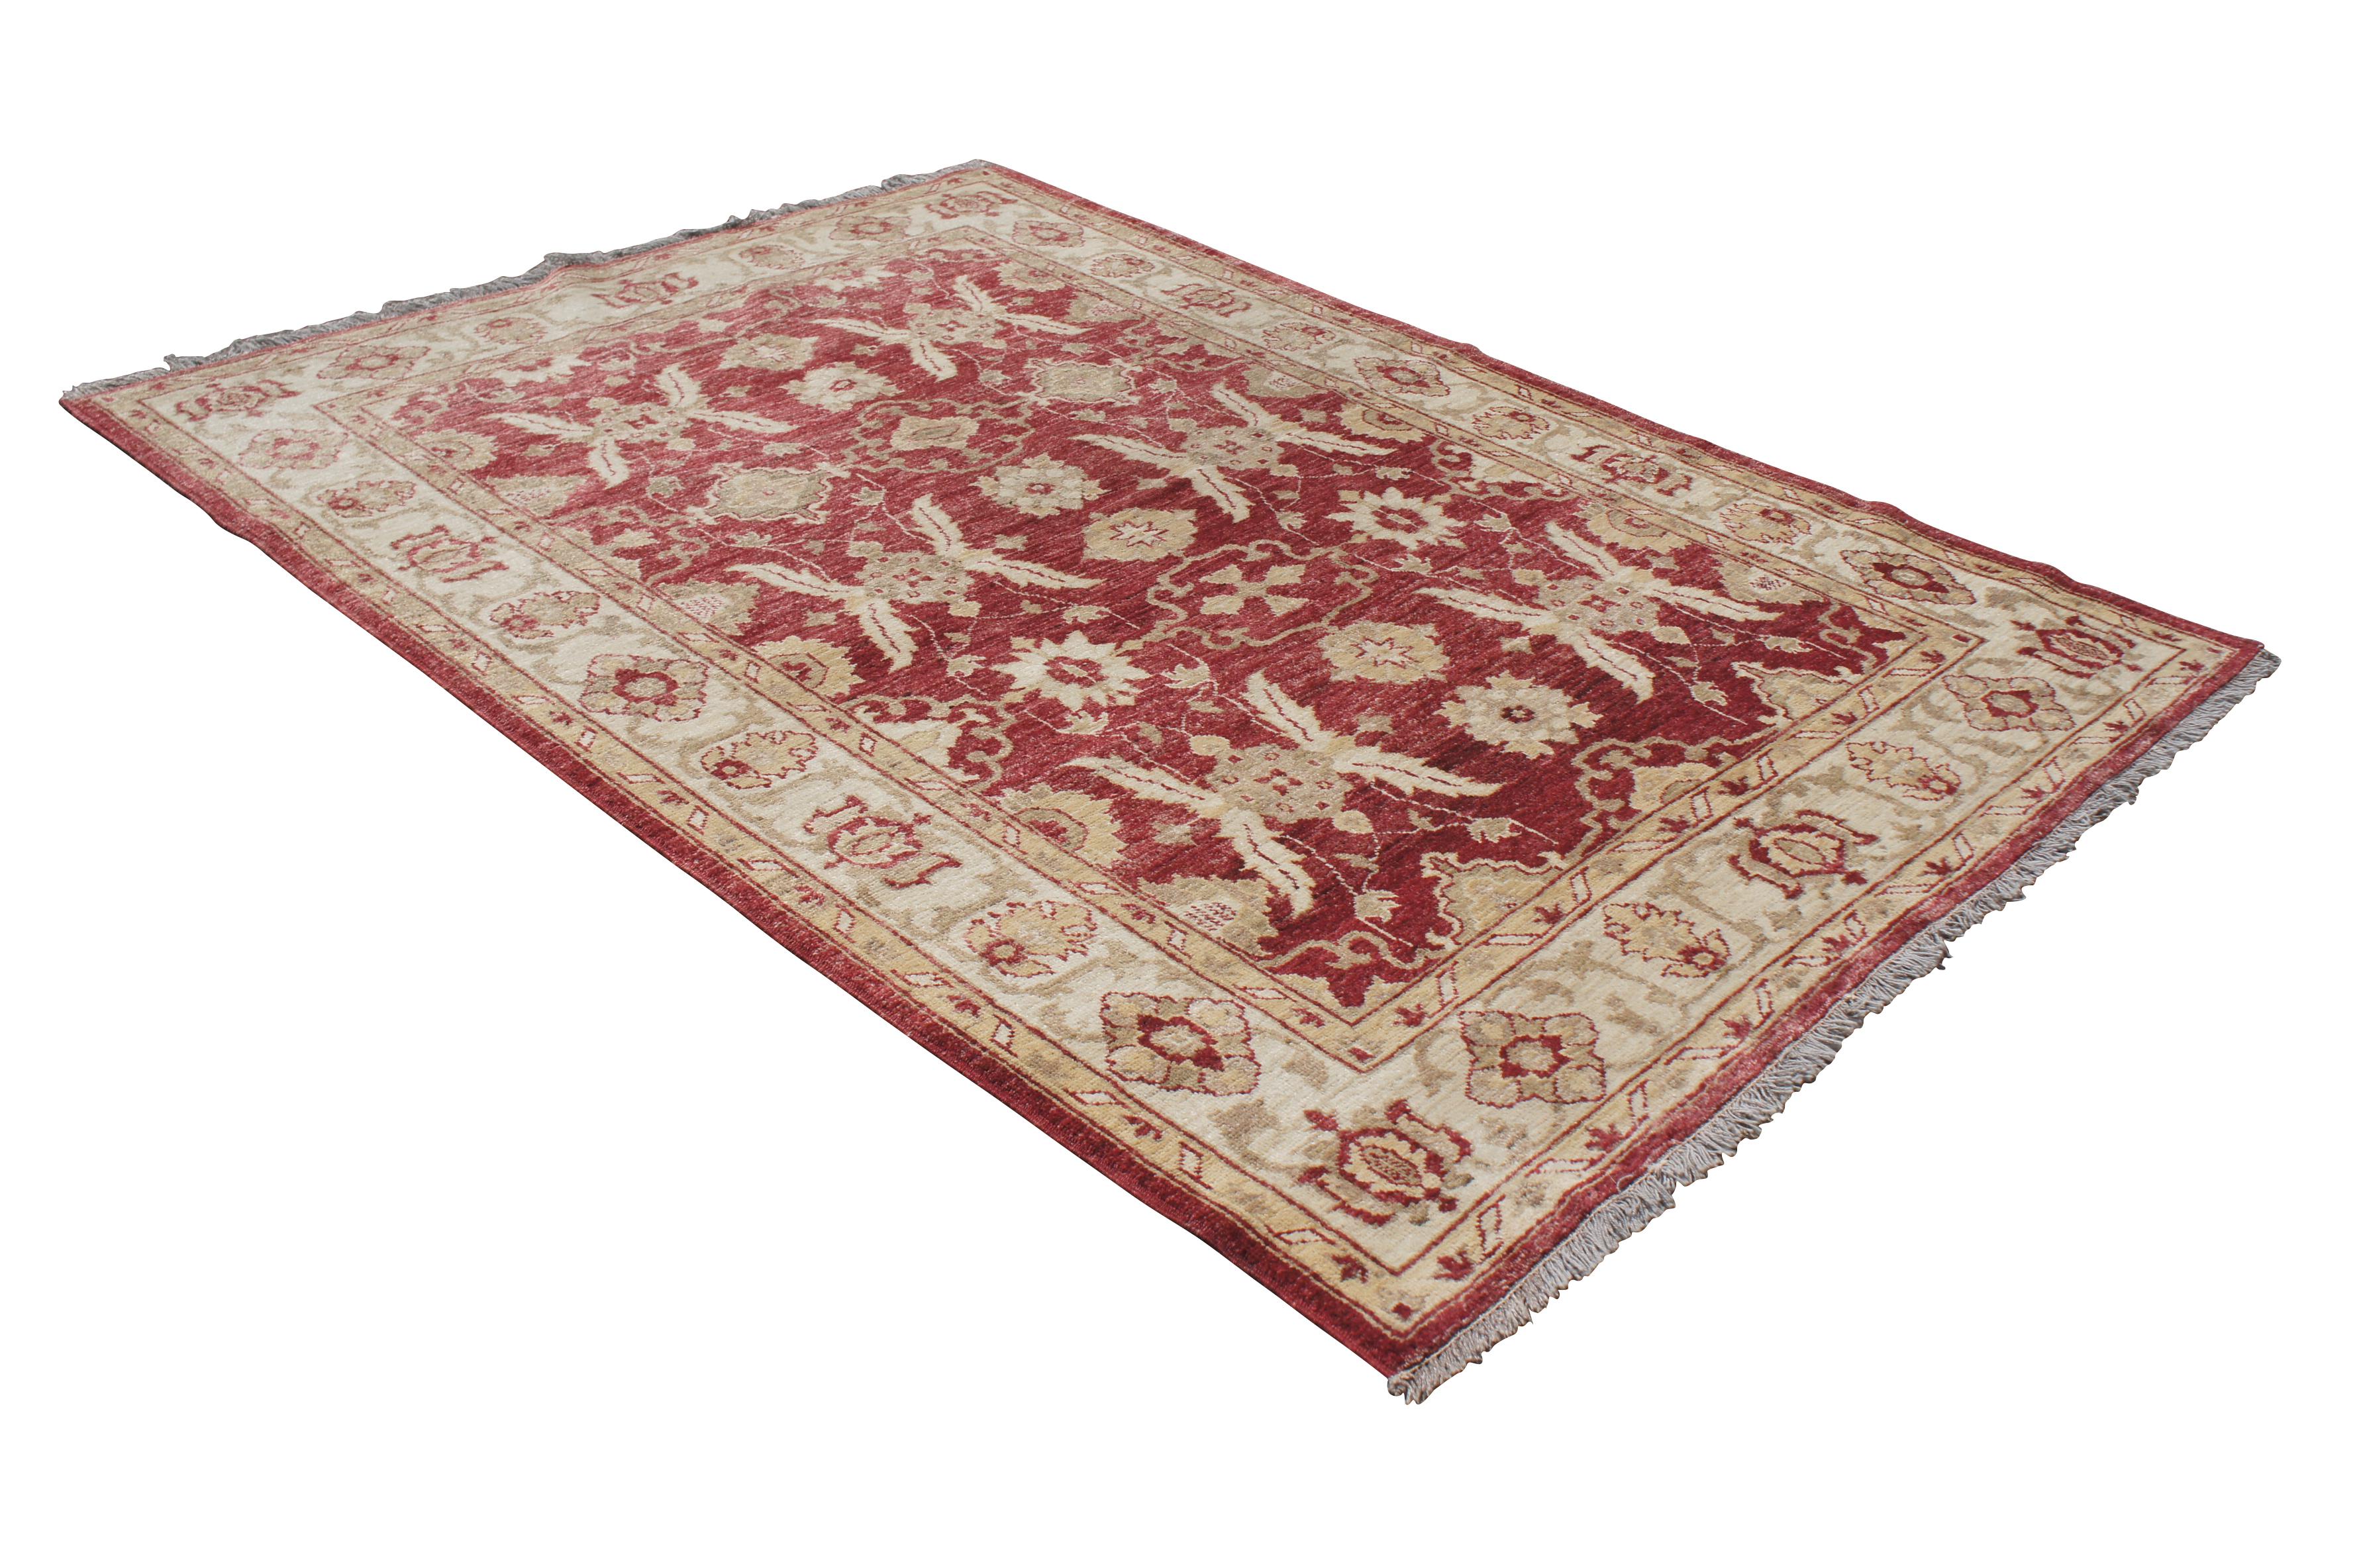 Hand Woven Turkish Red & Beige Geometric Floral Wool Carpet Area Rug 5' x 7' In Good Condition For Sale In Dayton, OH